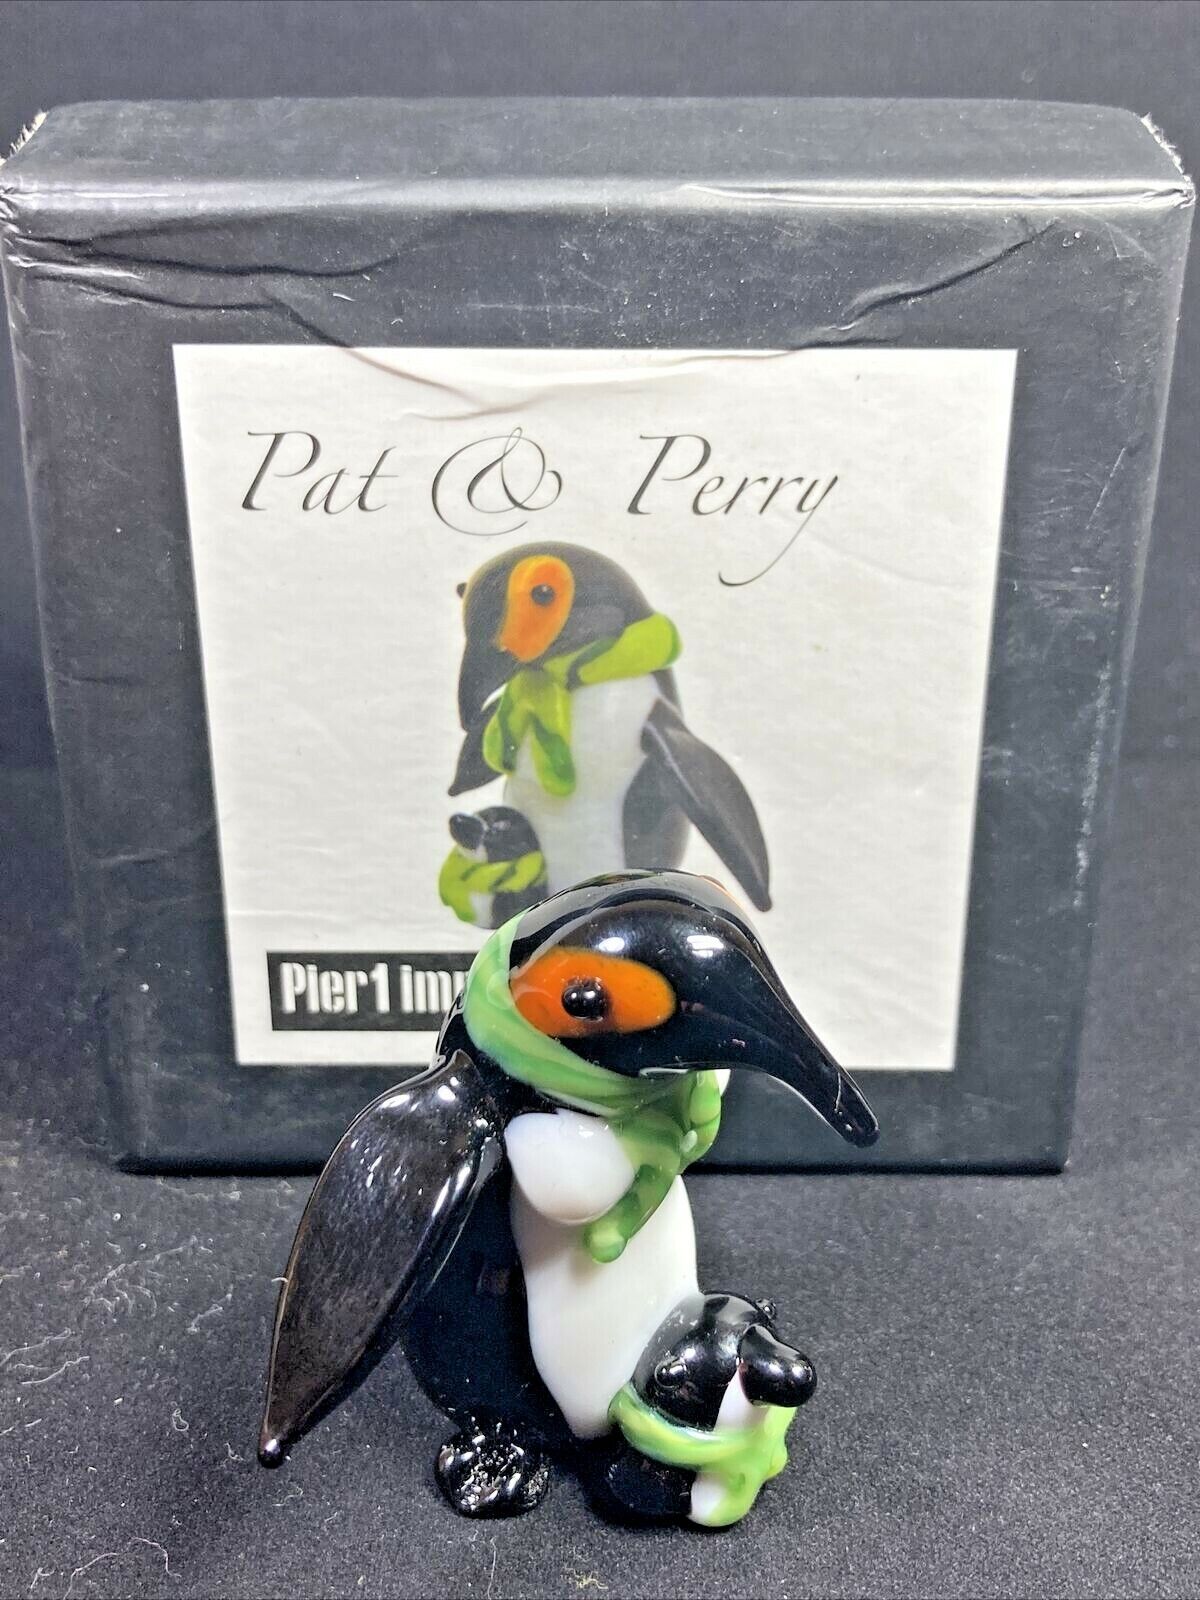 Pier 1 Imports Pat and Perry Art Glass Penguin Figurine